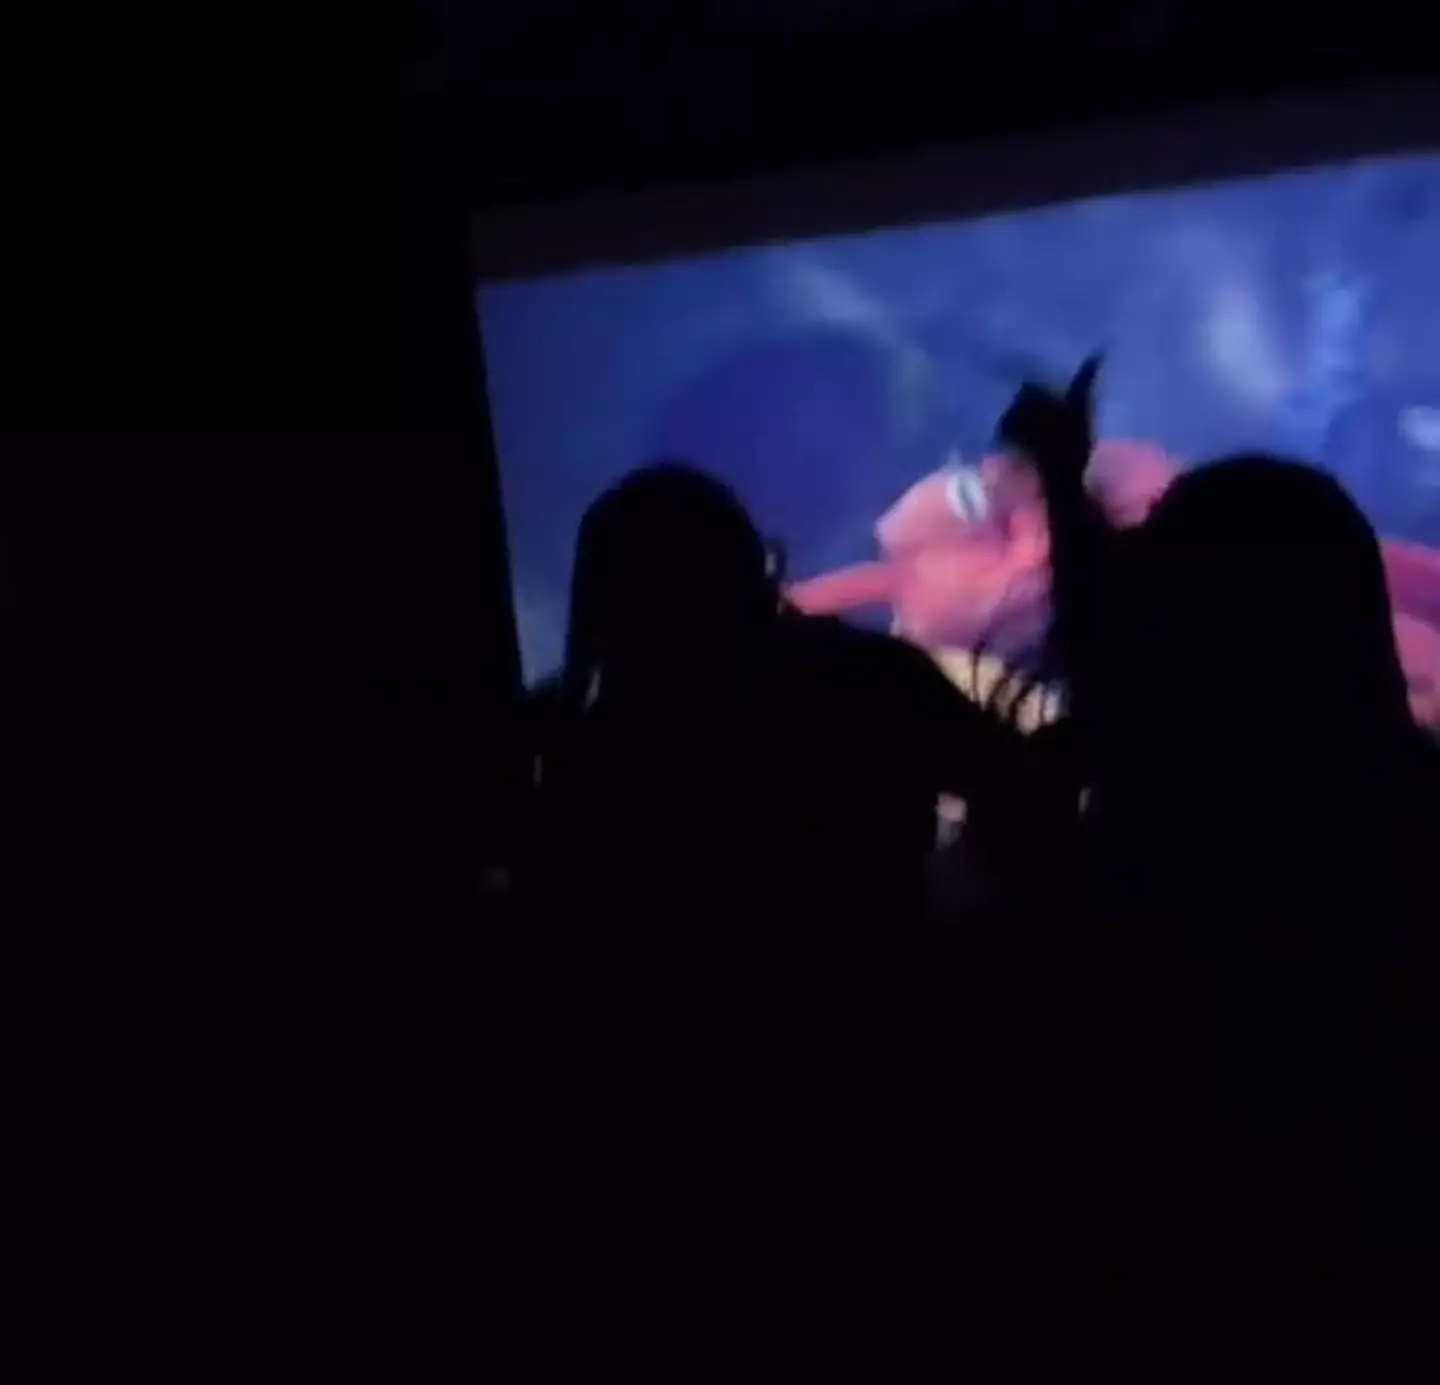 A heated argument broke out in a screening of The Little Mermaid.